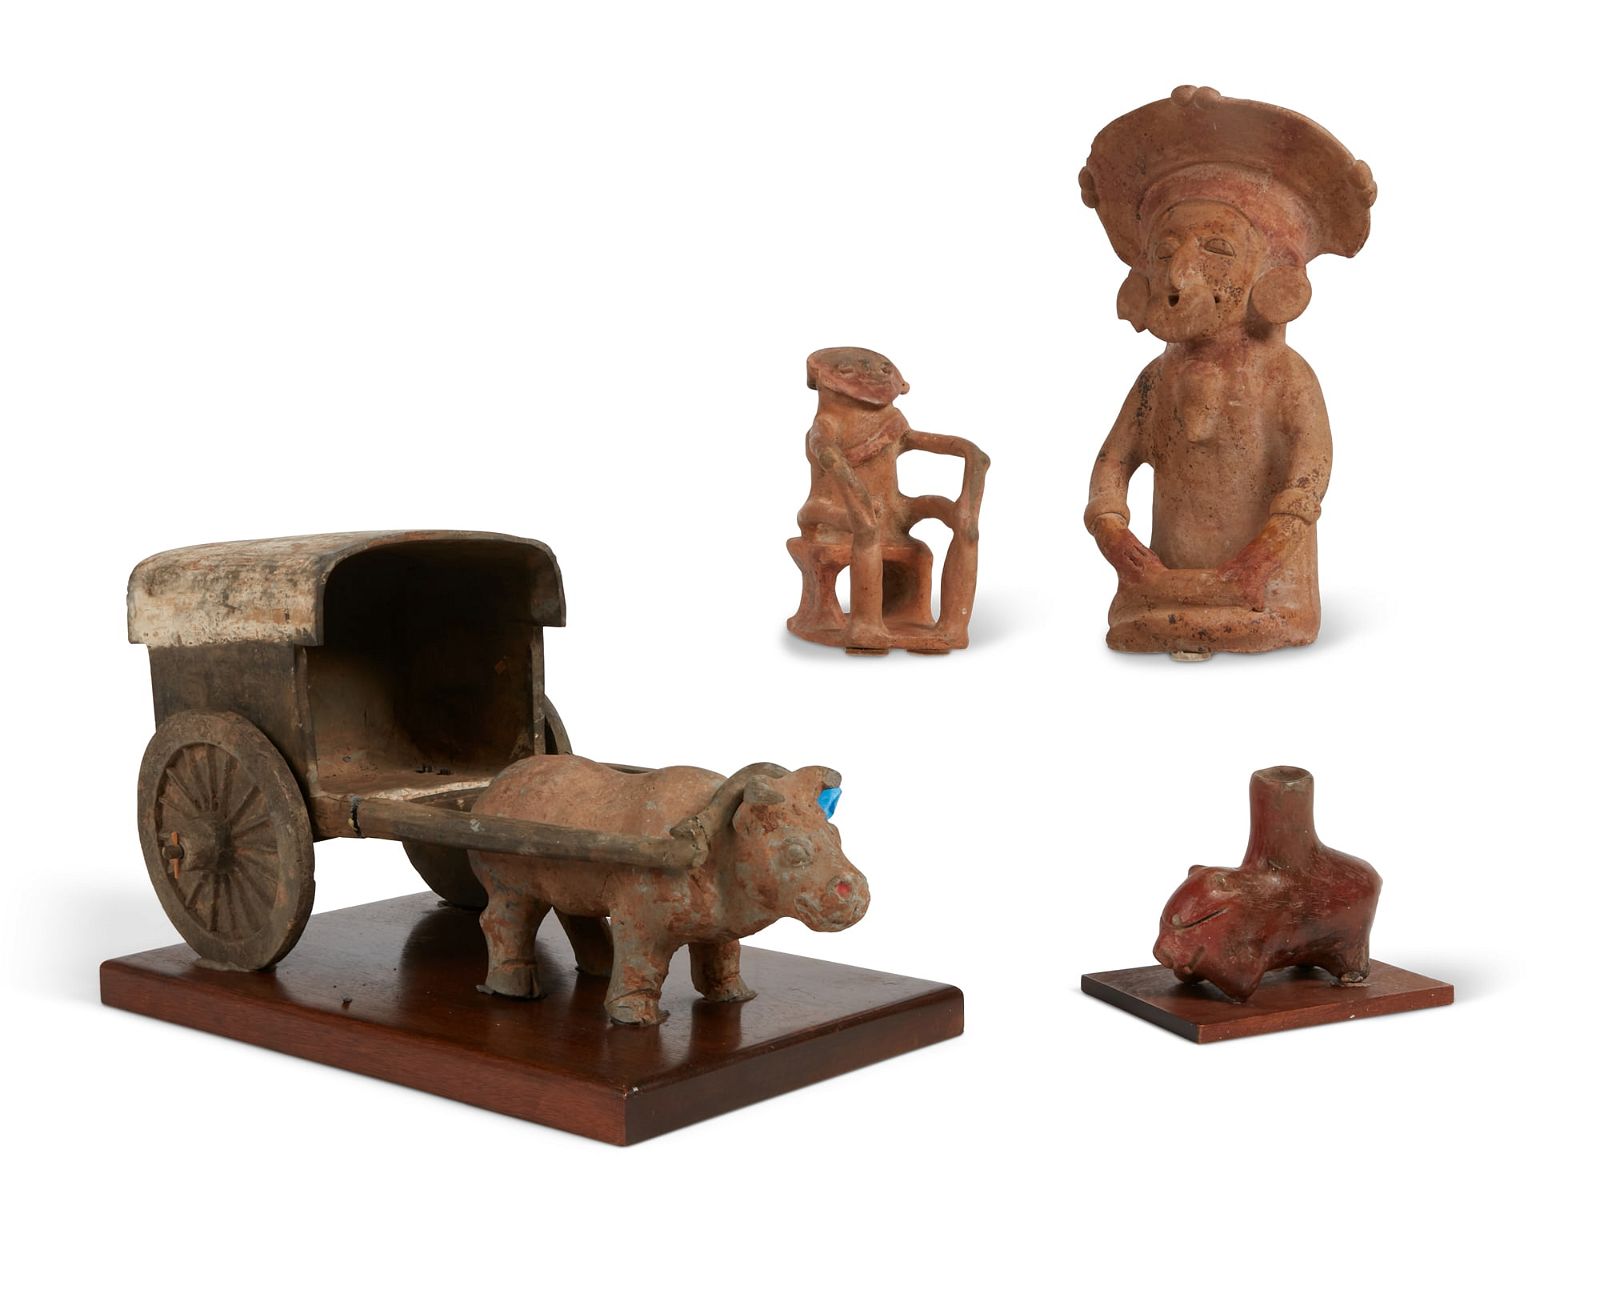 FOUR SOUTH AMERICAN POTTERY FIGURESFour